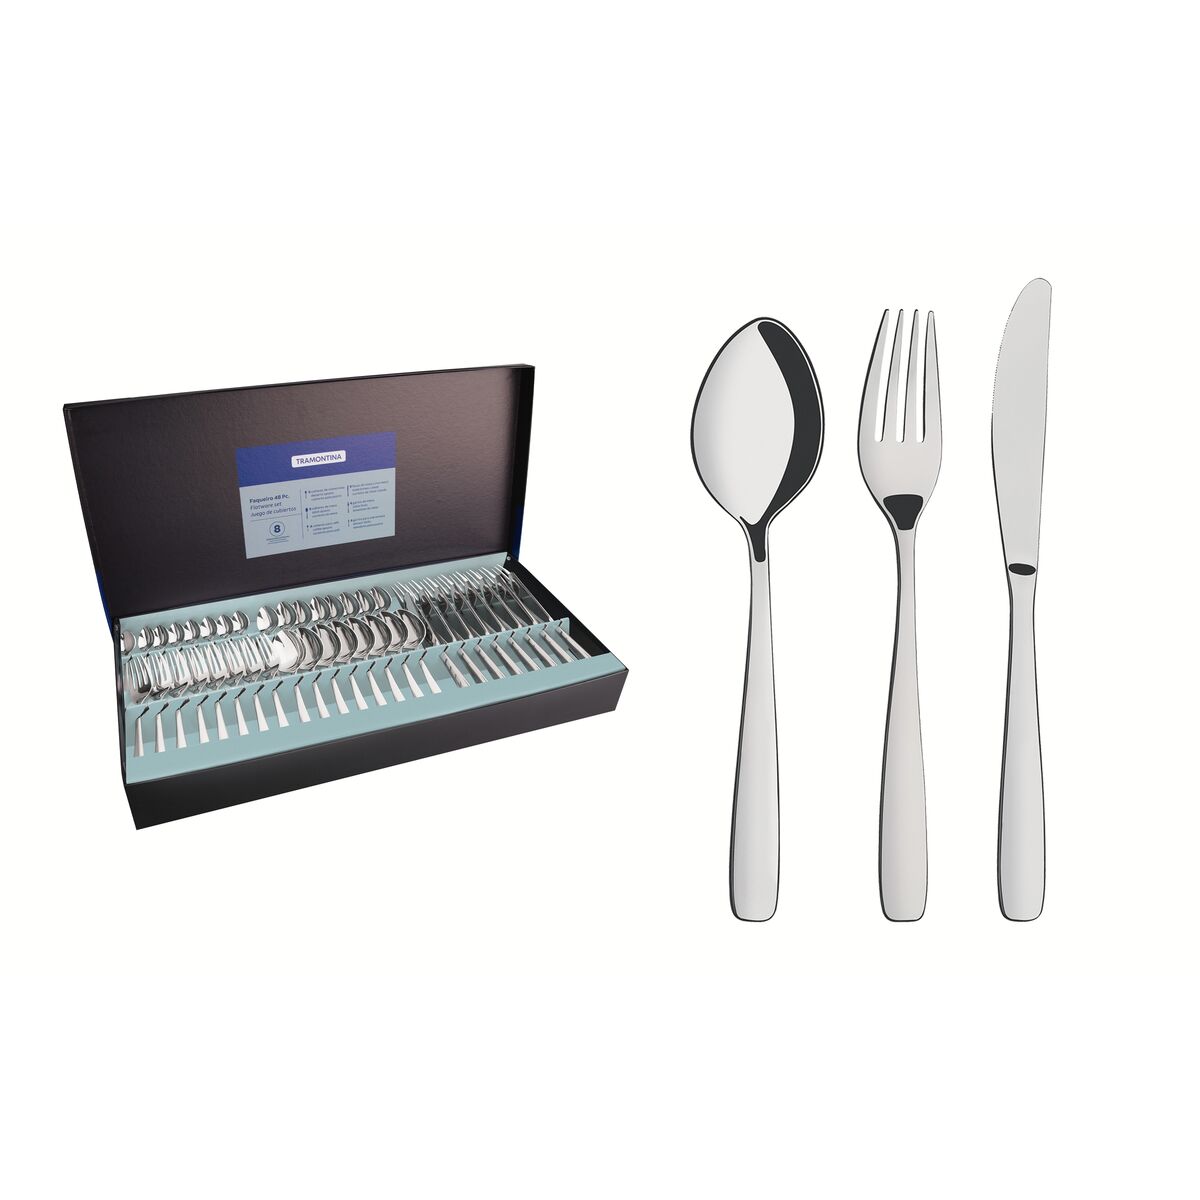 Tramontina Amazonas stainless steel flatware set with table knives and high gloss finish, 48 pc set